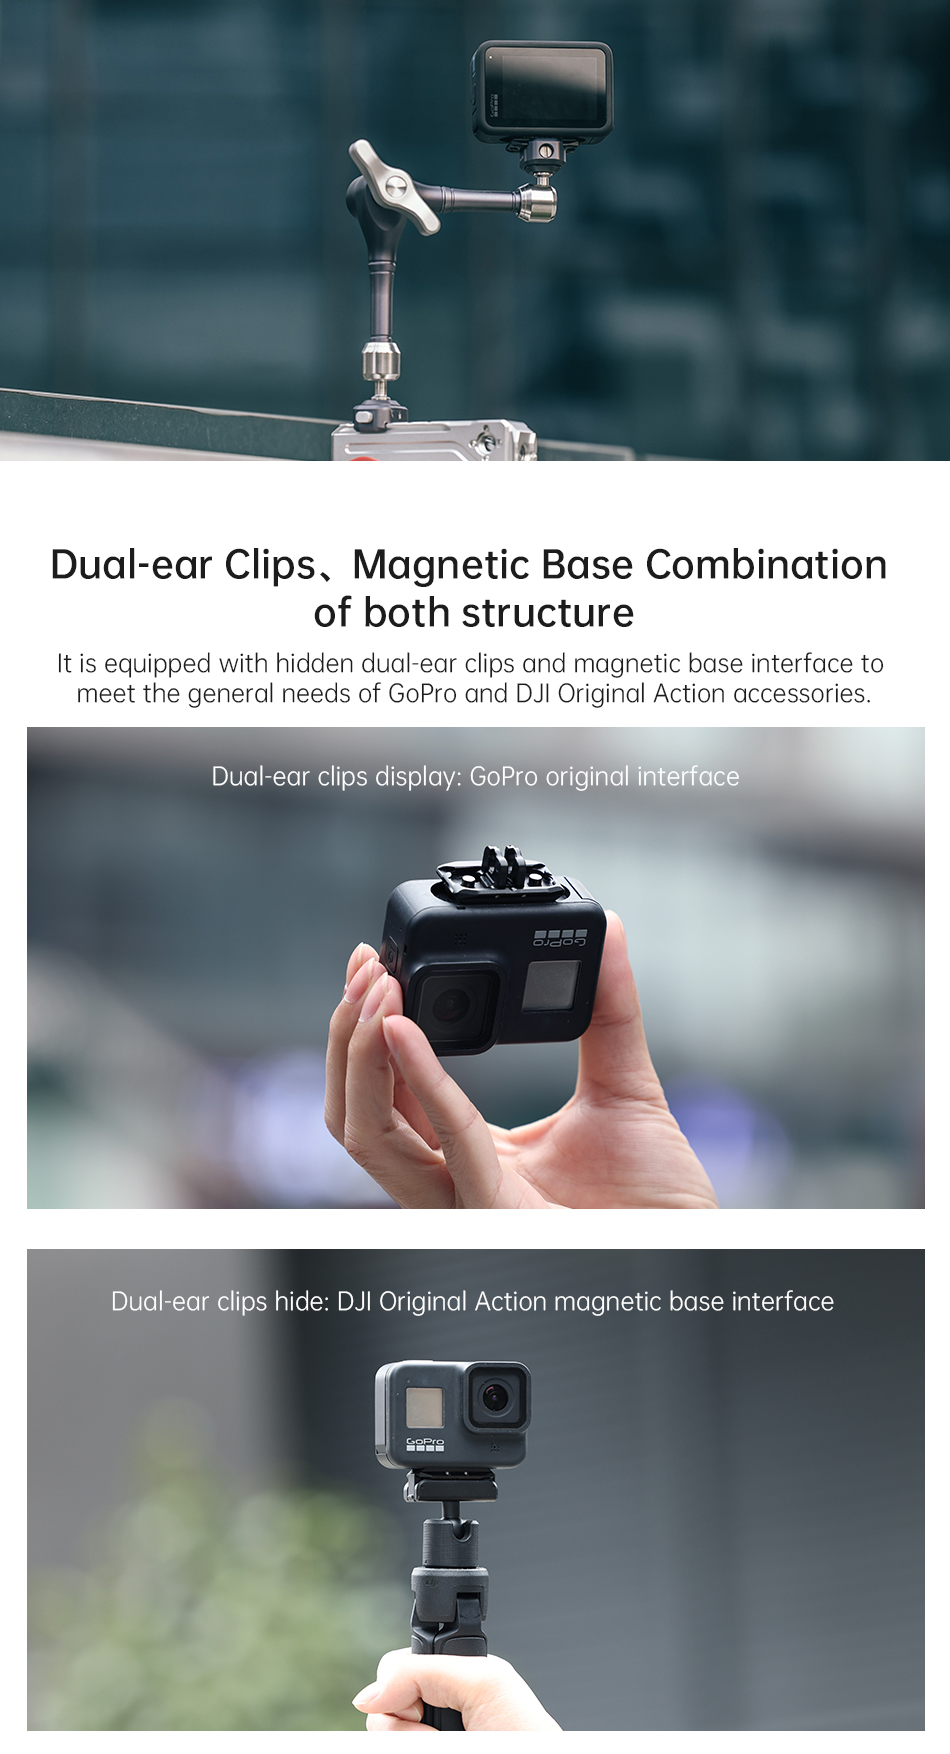 F22 Magnetic Base for Gopro to Action Magnetic Base for Gopro to Action 3235 suppliers,manufacturers,factories